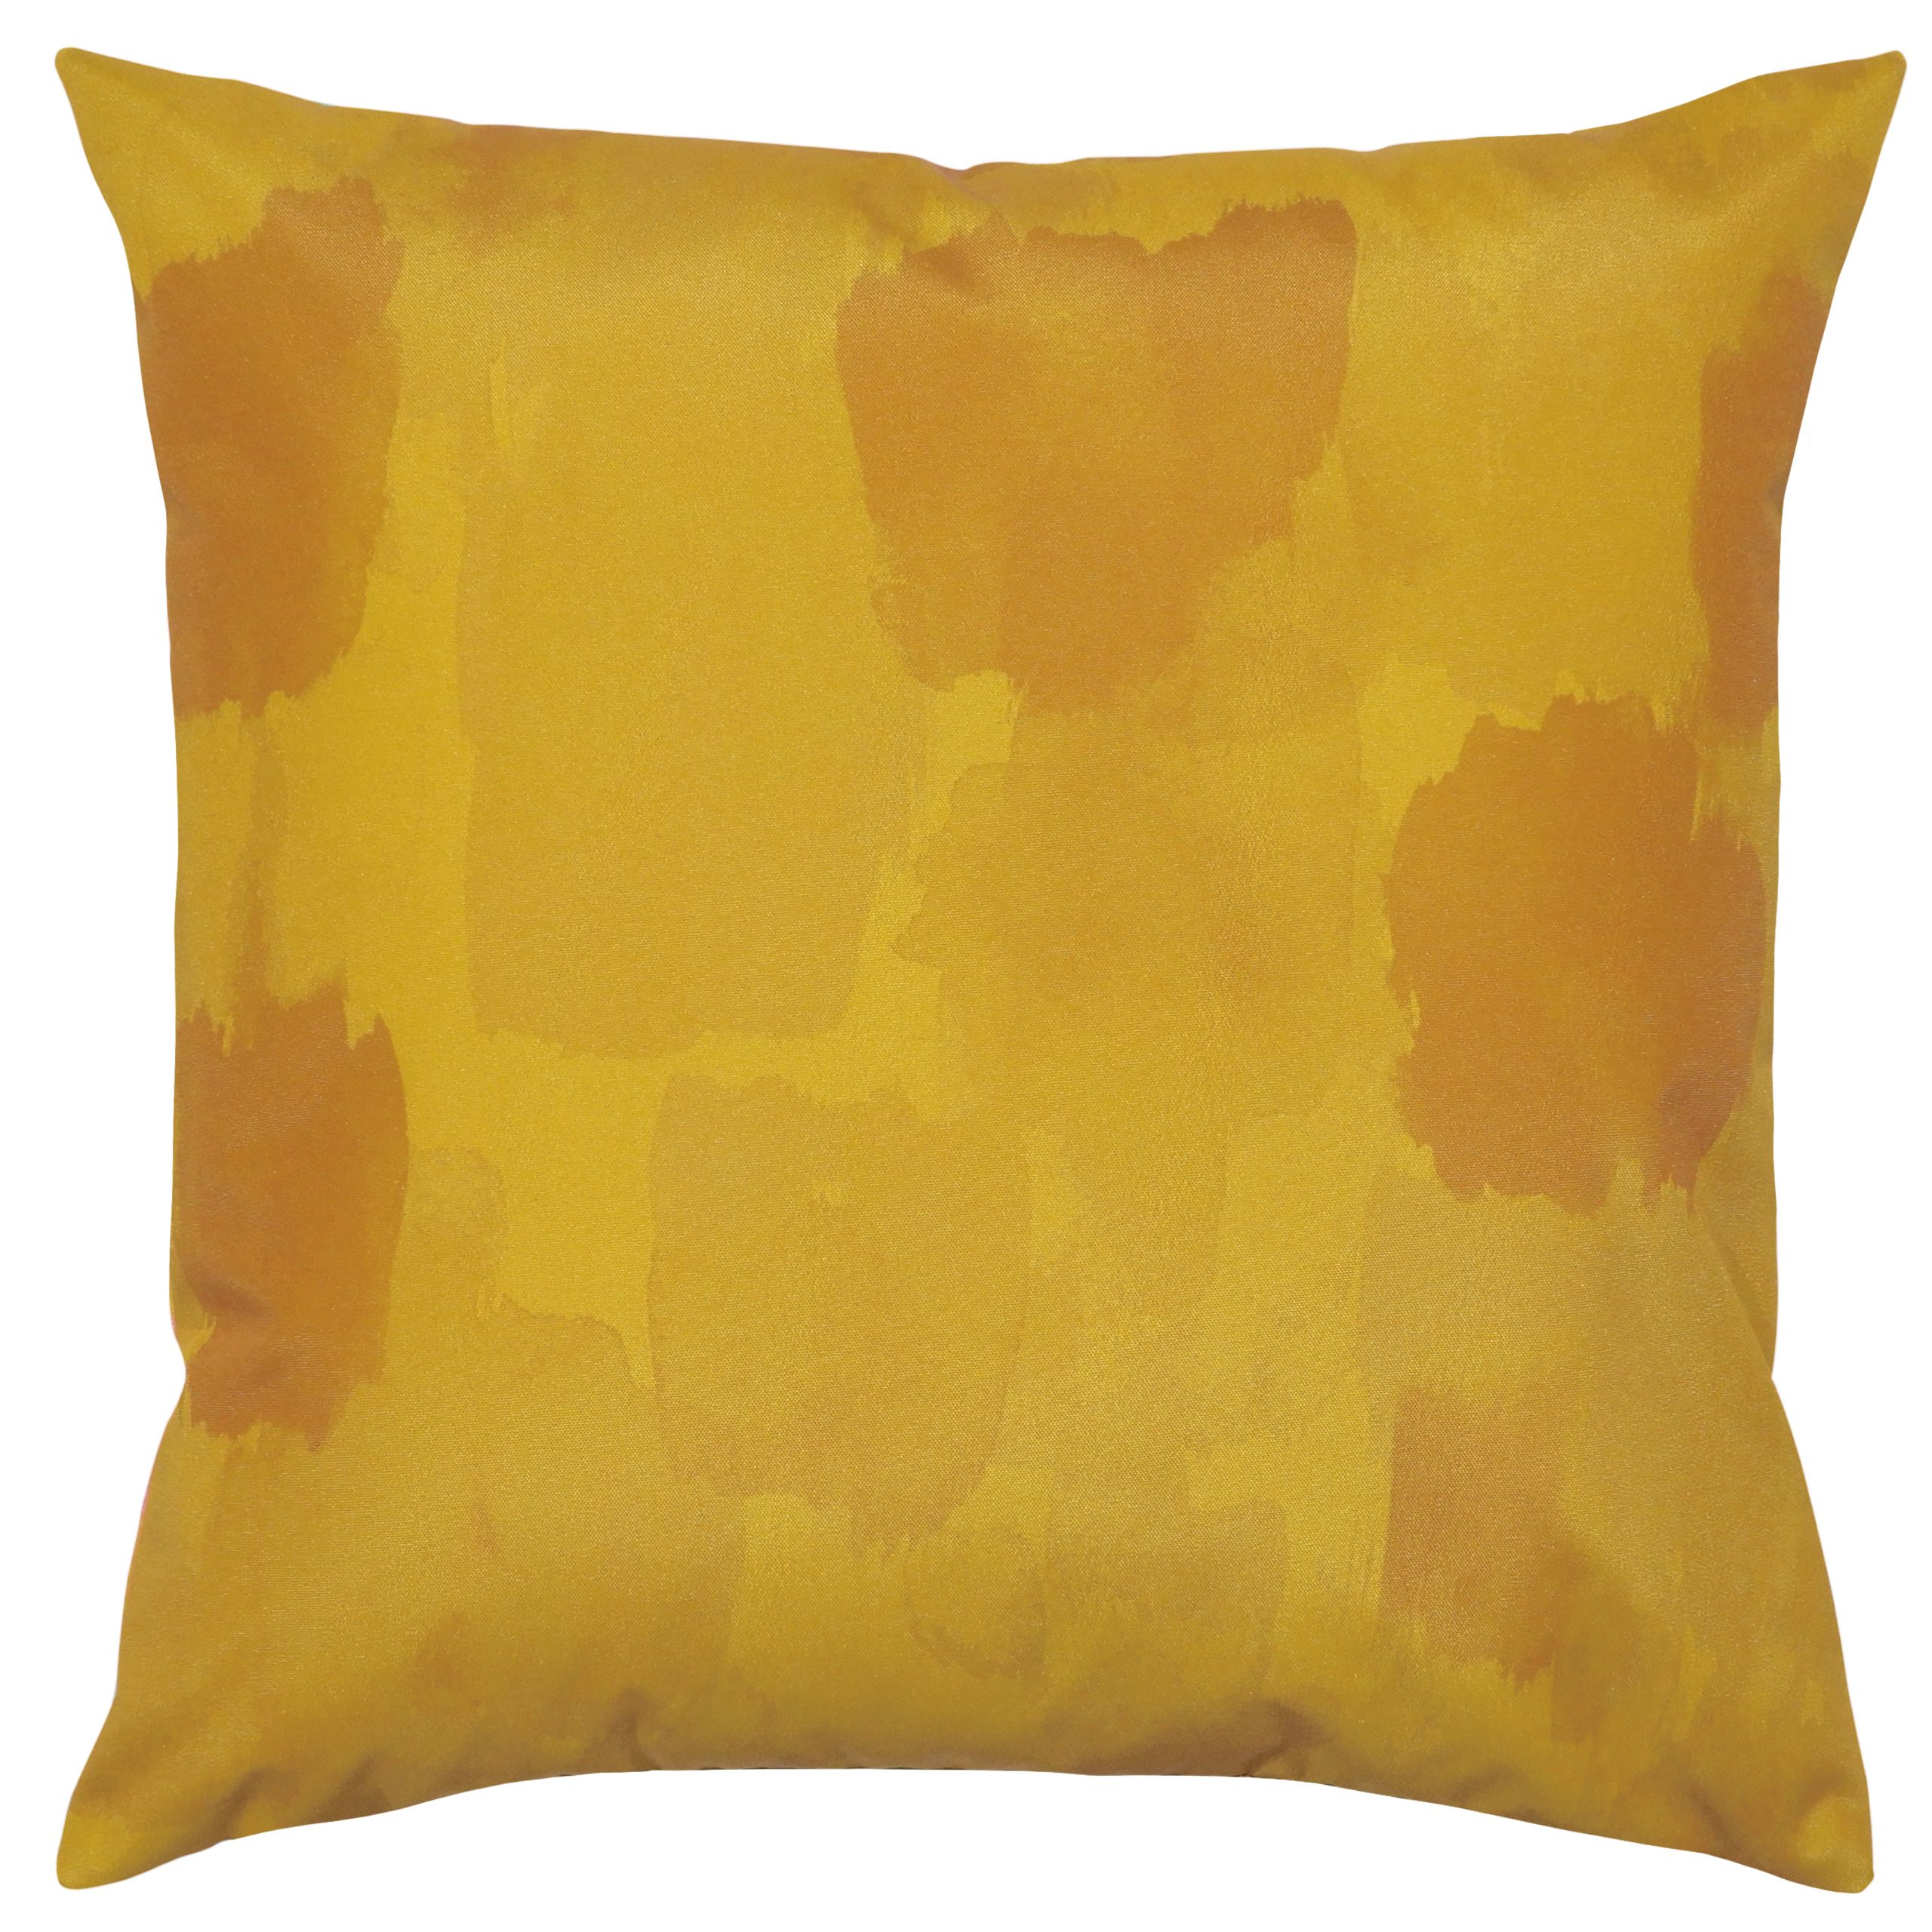 With bold and bright brush strokes this abstract design will definitely be an eye catcher. This durable water resistant cushion is great to brighten up your garden or outdoor space.